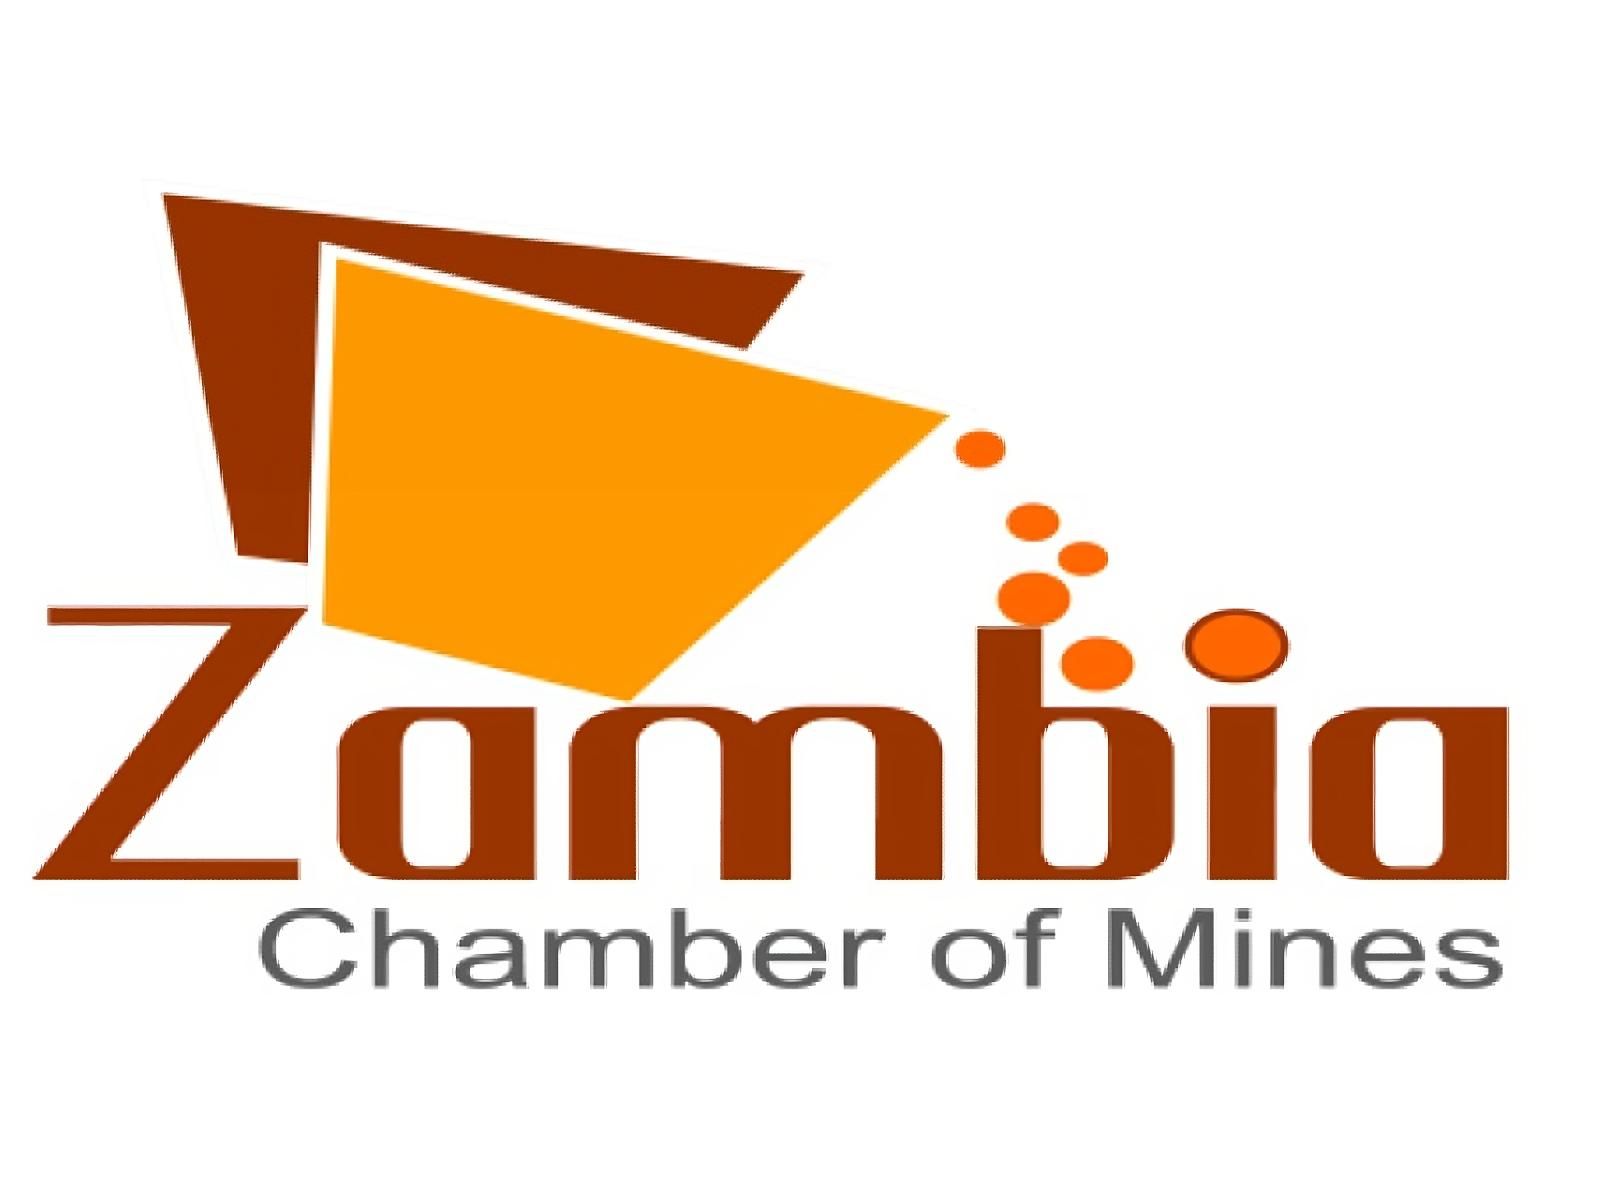 Zambia Chamber of Mines to Promote Investment Prospects as CMA Partner